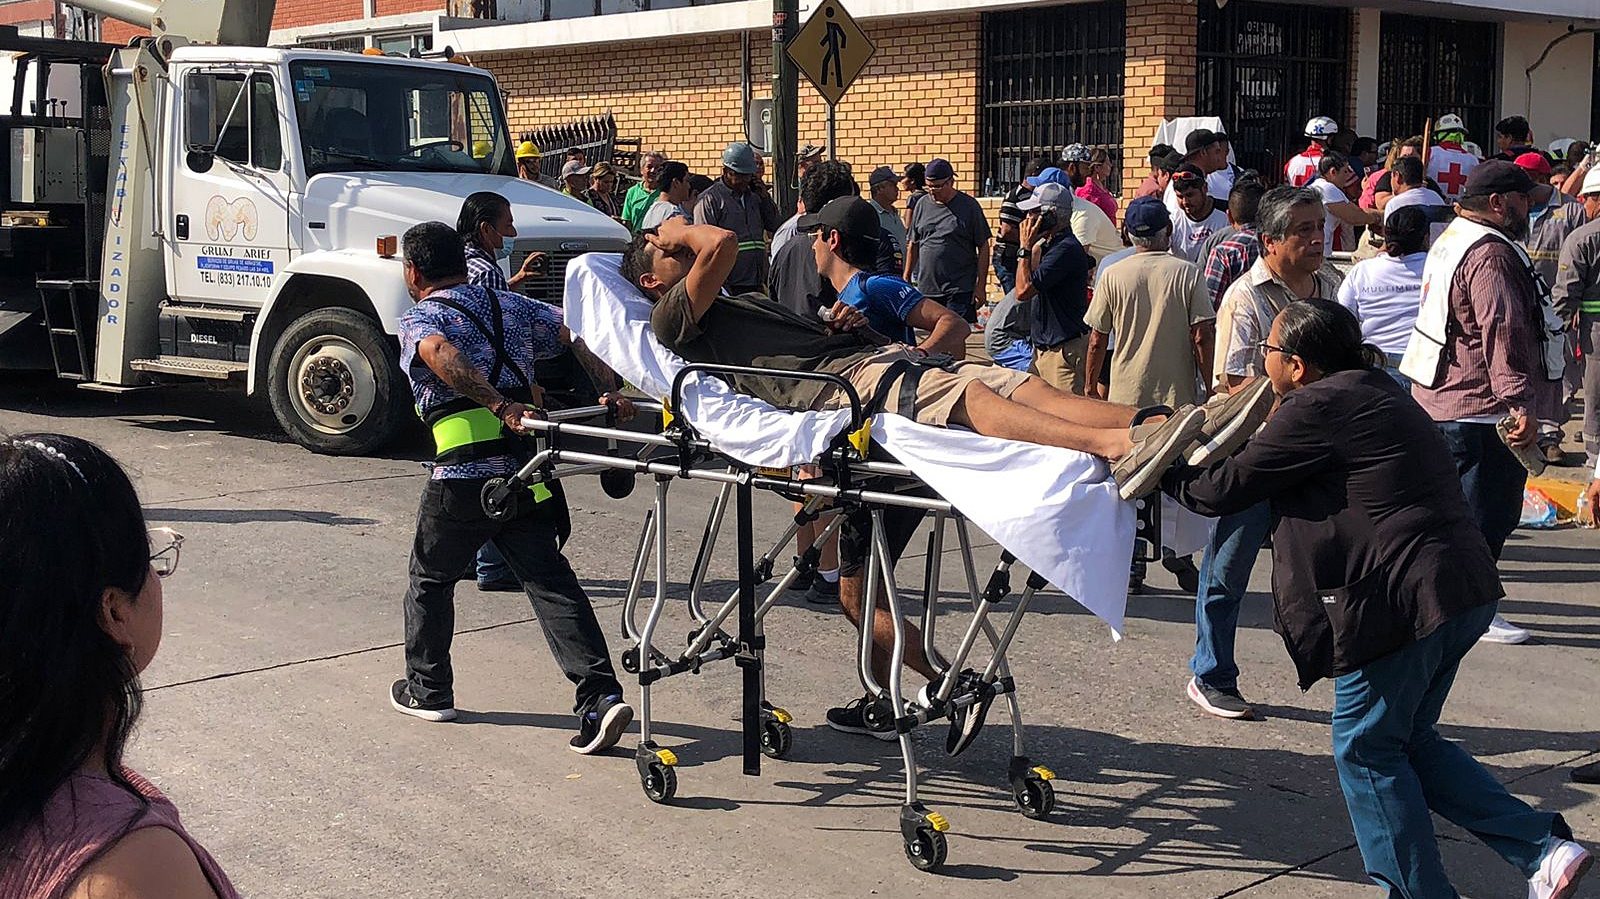 epa10895607 A man is carried away on a stretcher after the roof of a church collapsed killing at least 10 people in Ciudad Madero, Mexico, 01 October 2023 (issued 02 October 2023). At least 10 people died when the roof of a church collapsed during a baptism ceremony in the afternoon of 01 October.  EPA/STR